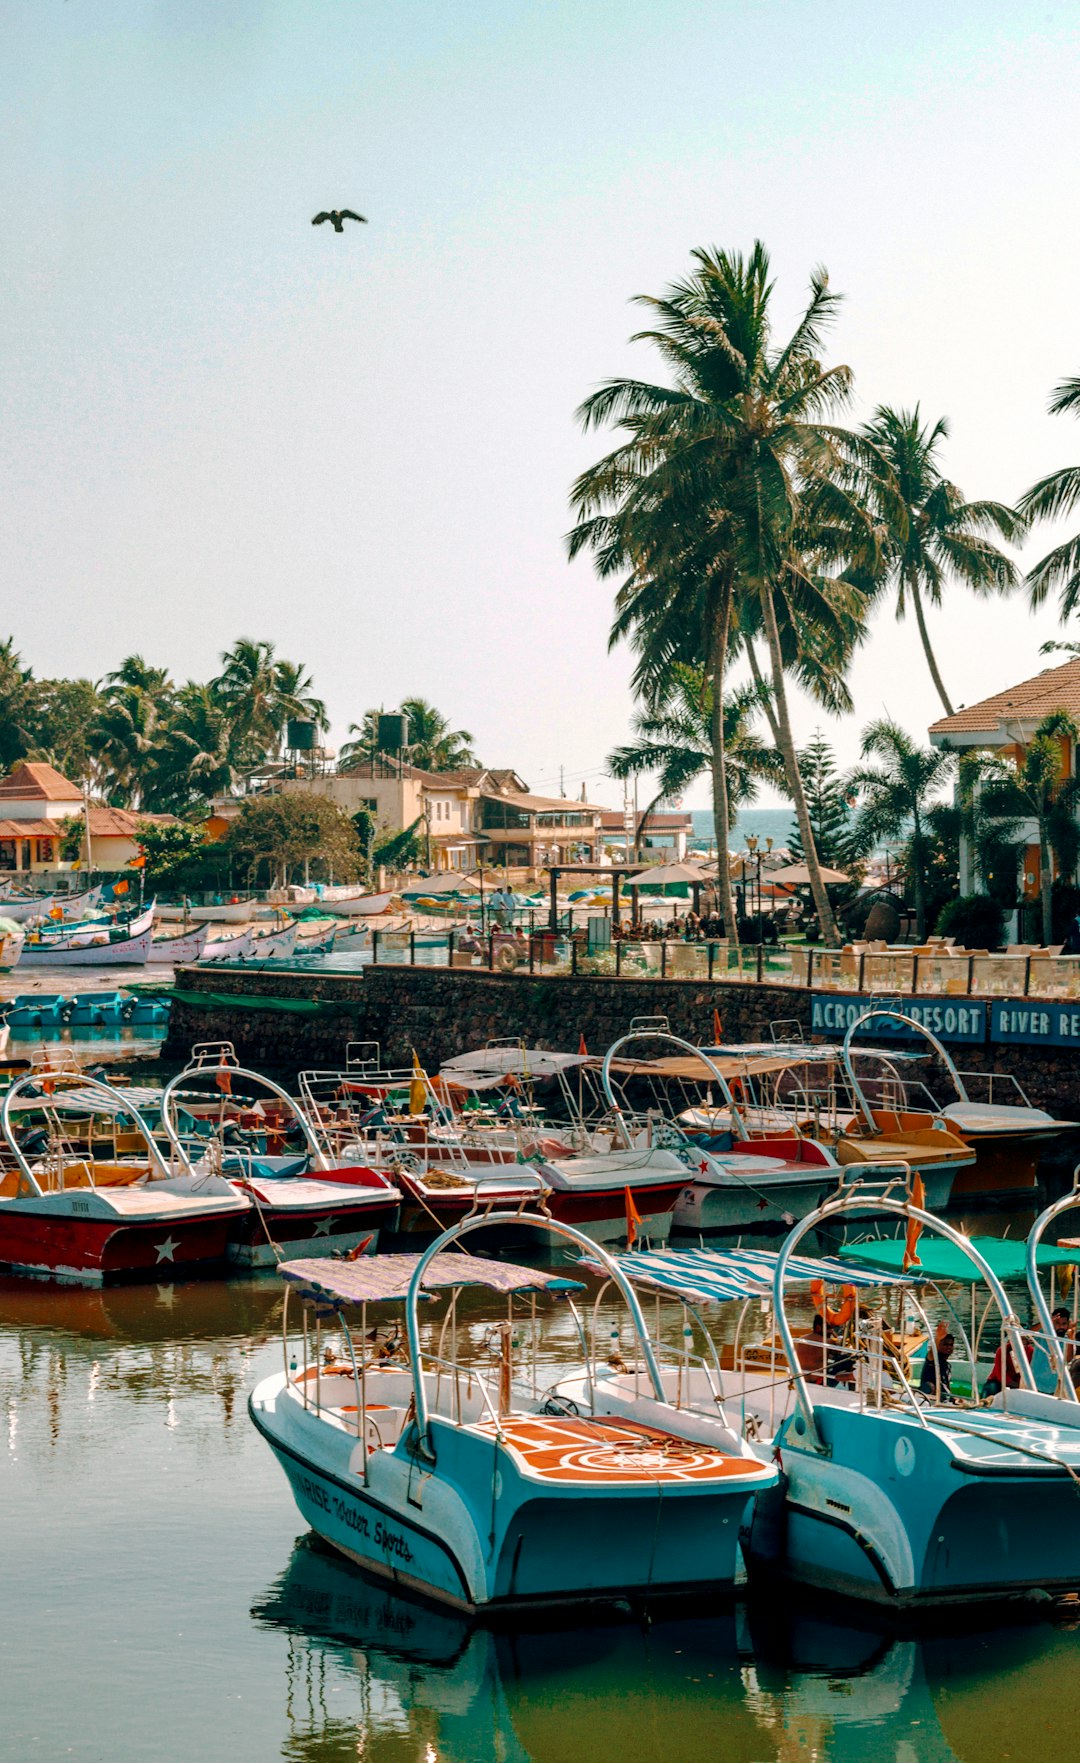 boats on dock near buildings during daytime